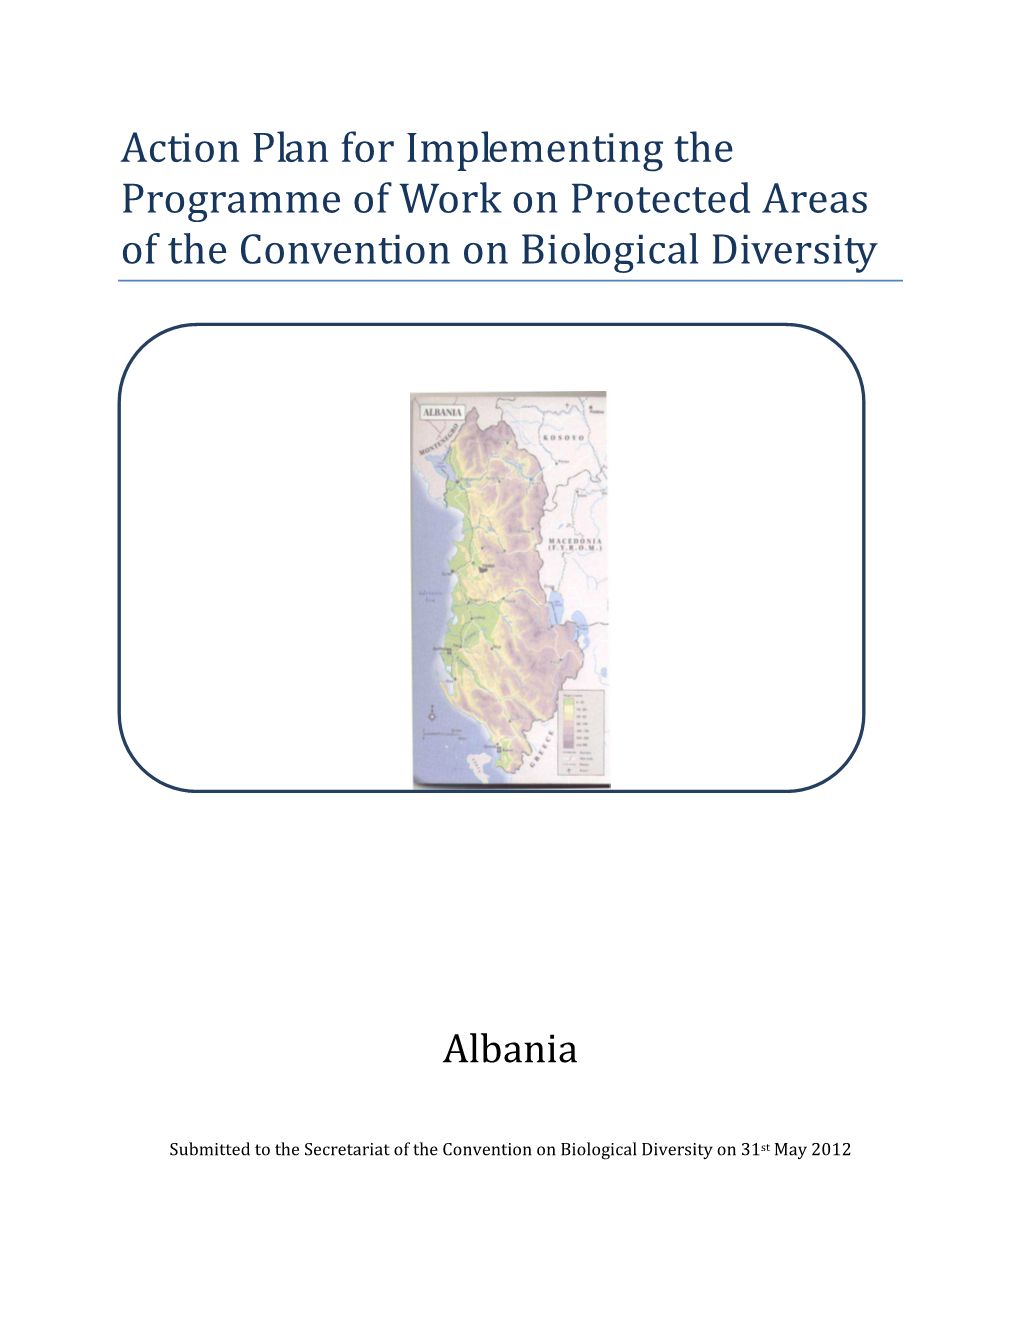 Action Plan for Implementing the Programme of Work on Protected Areas of the Convention on Biological Diversity